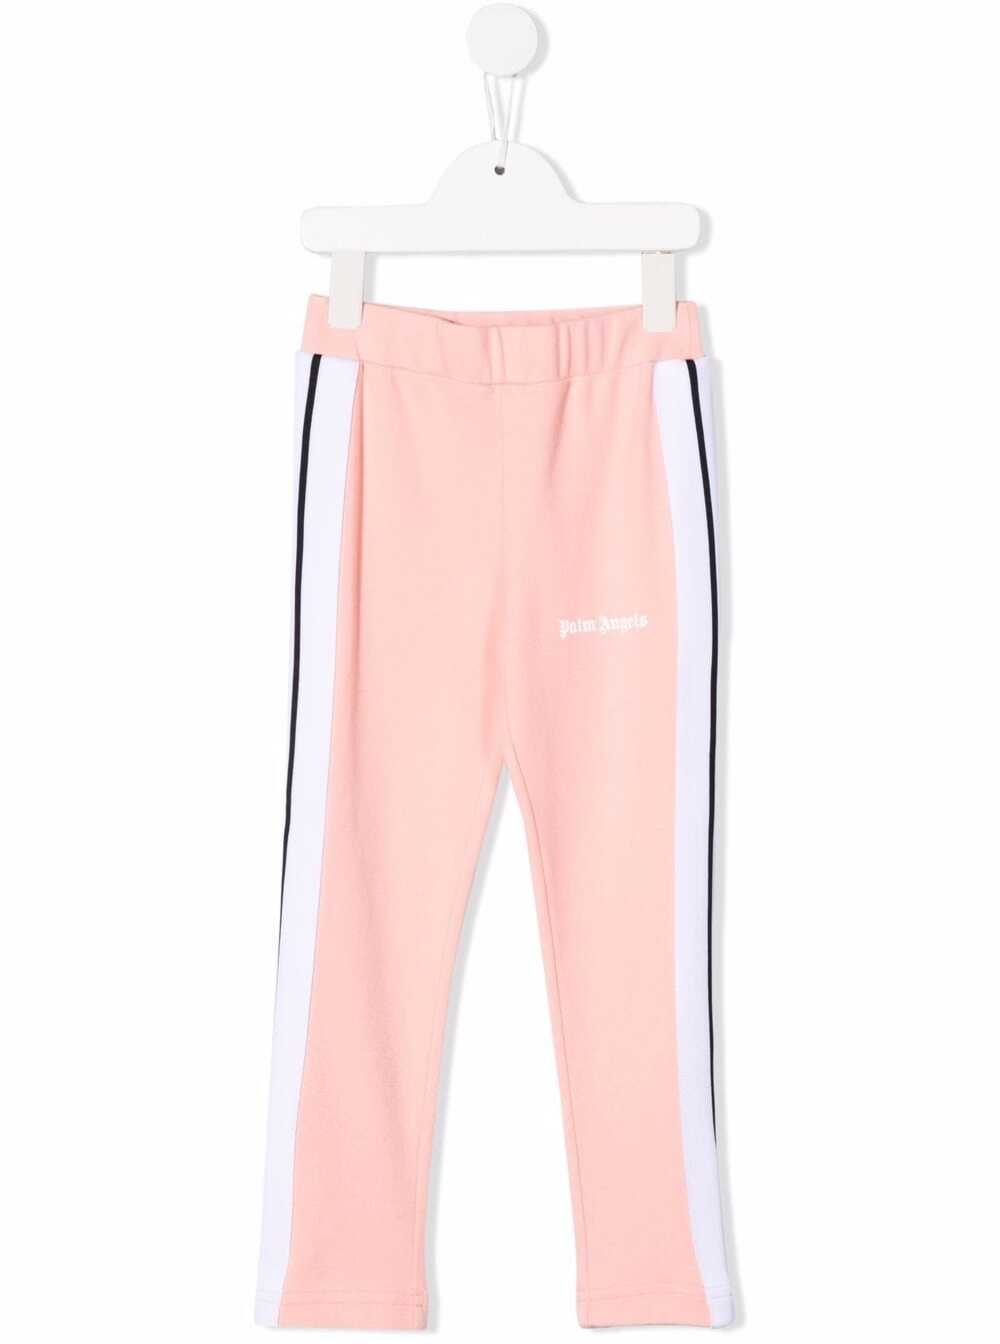 Palm Angels Kids Boys Track Pink Jersey Pants With Logo